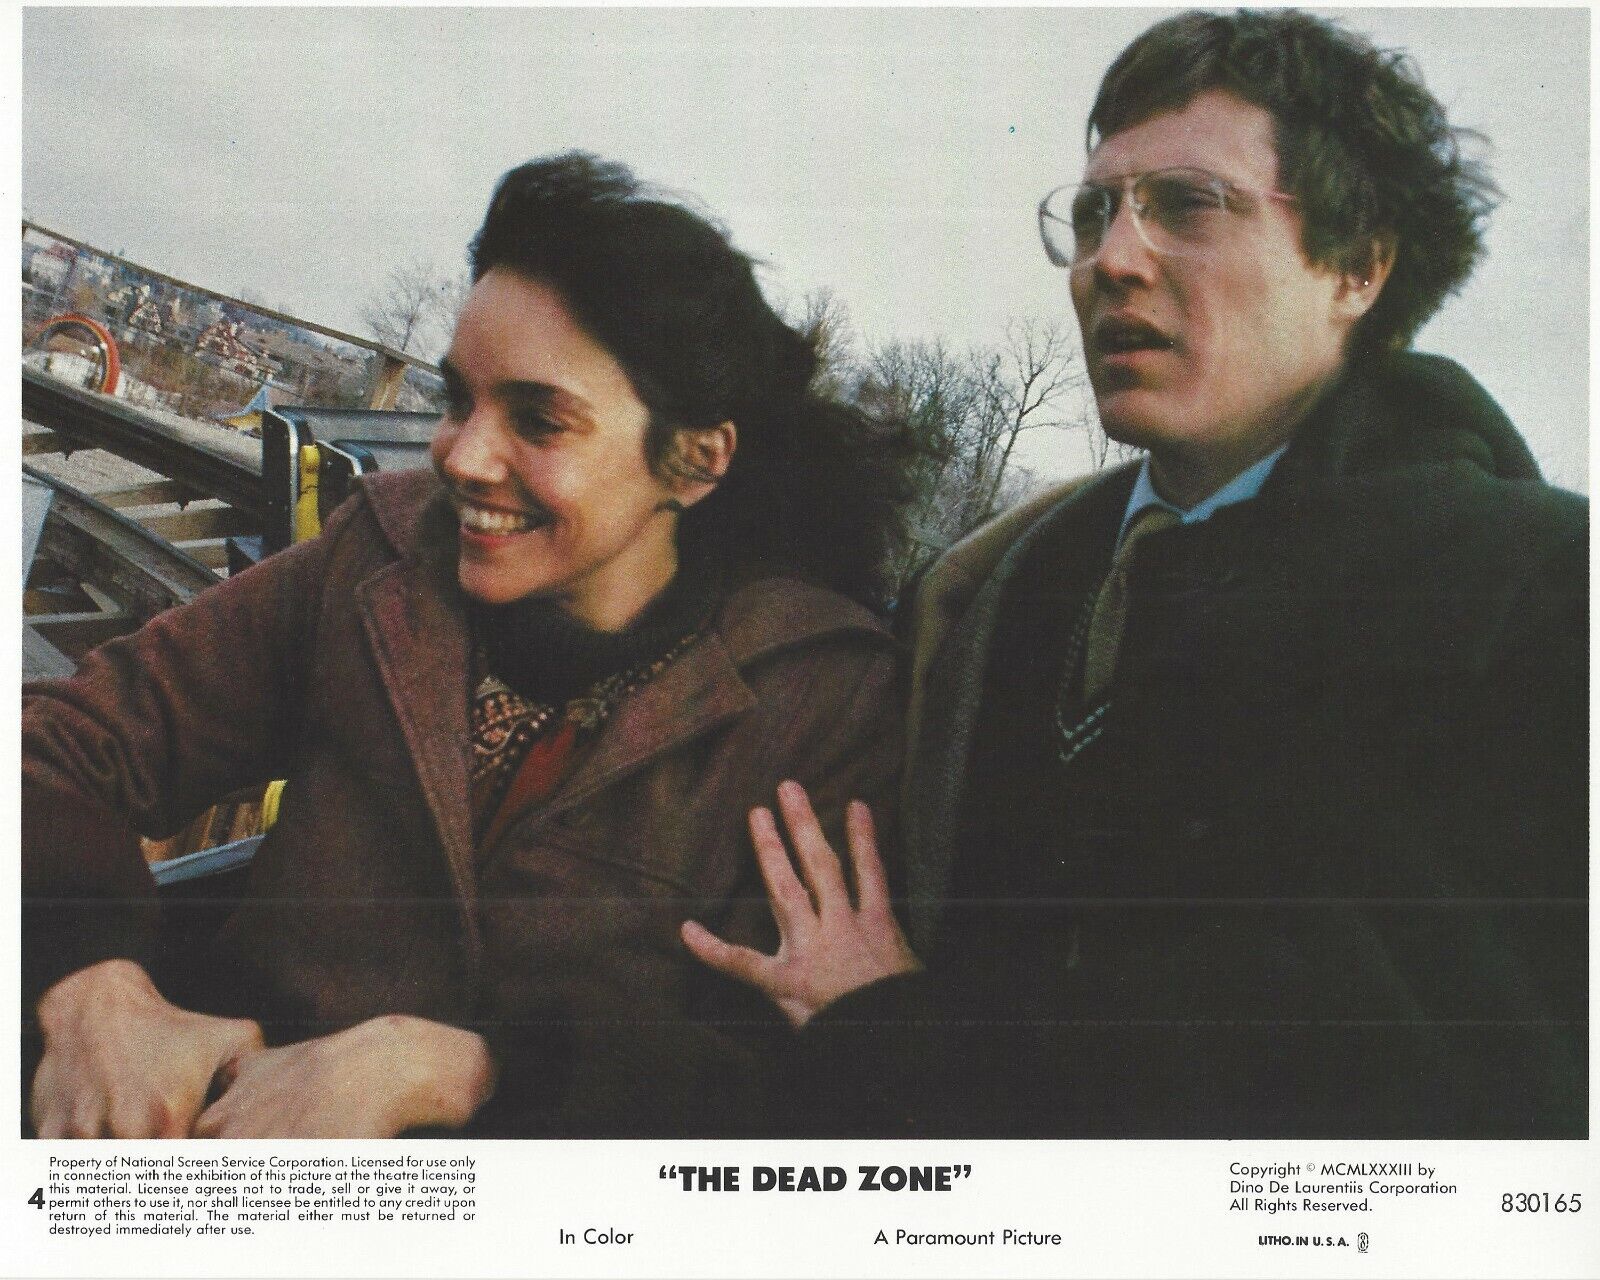 The Dead Zone Original 8x10 Lobby Card Poster Photo Poster painting 1983 #4 Stephen King Walken